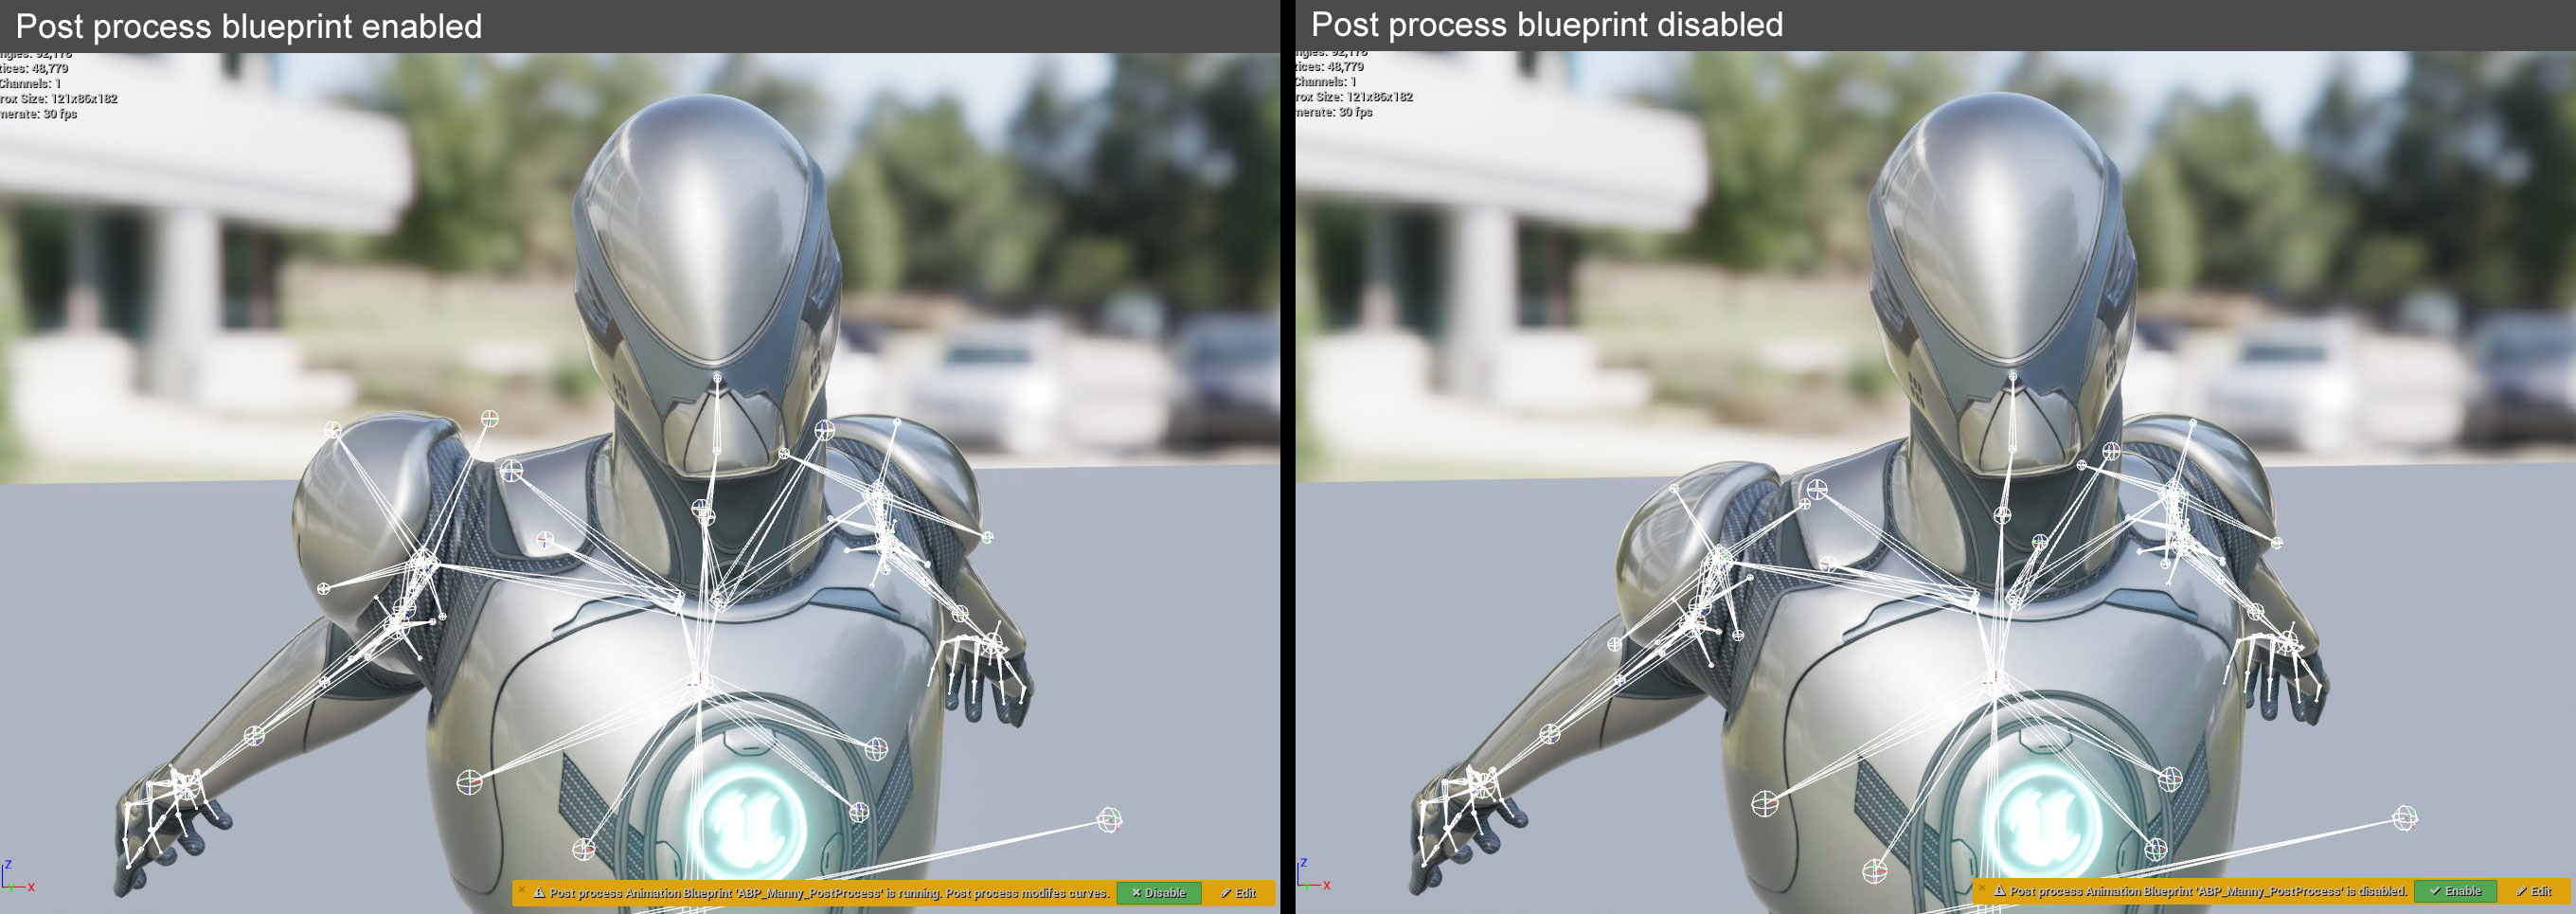 Comparison with the Post Process Animation blueprint enabled and disabled